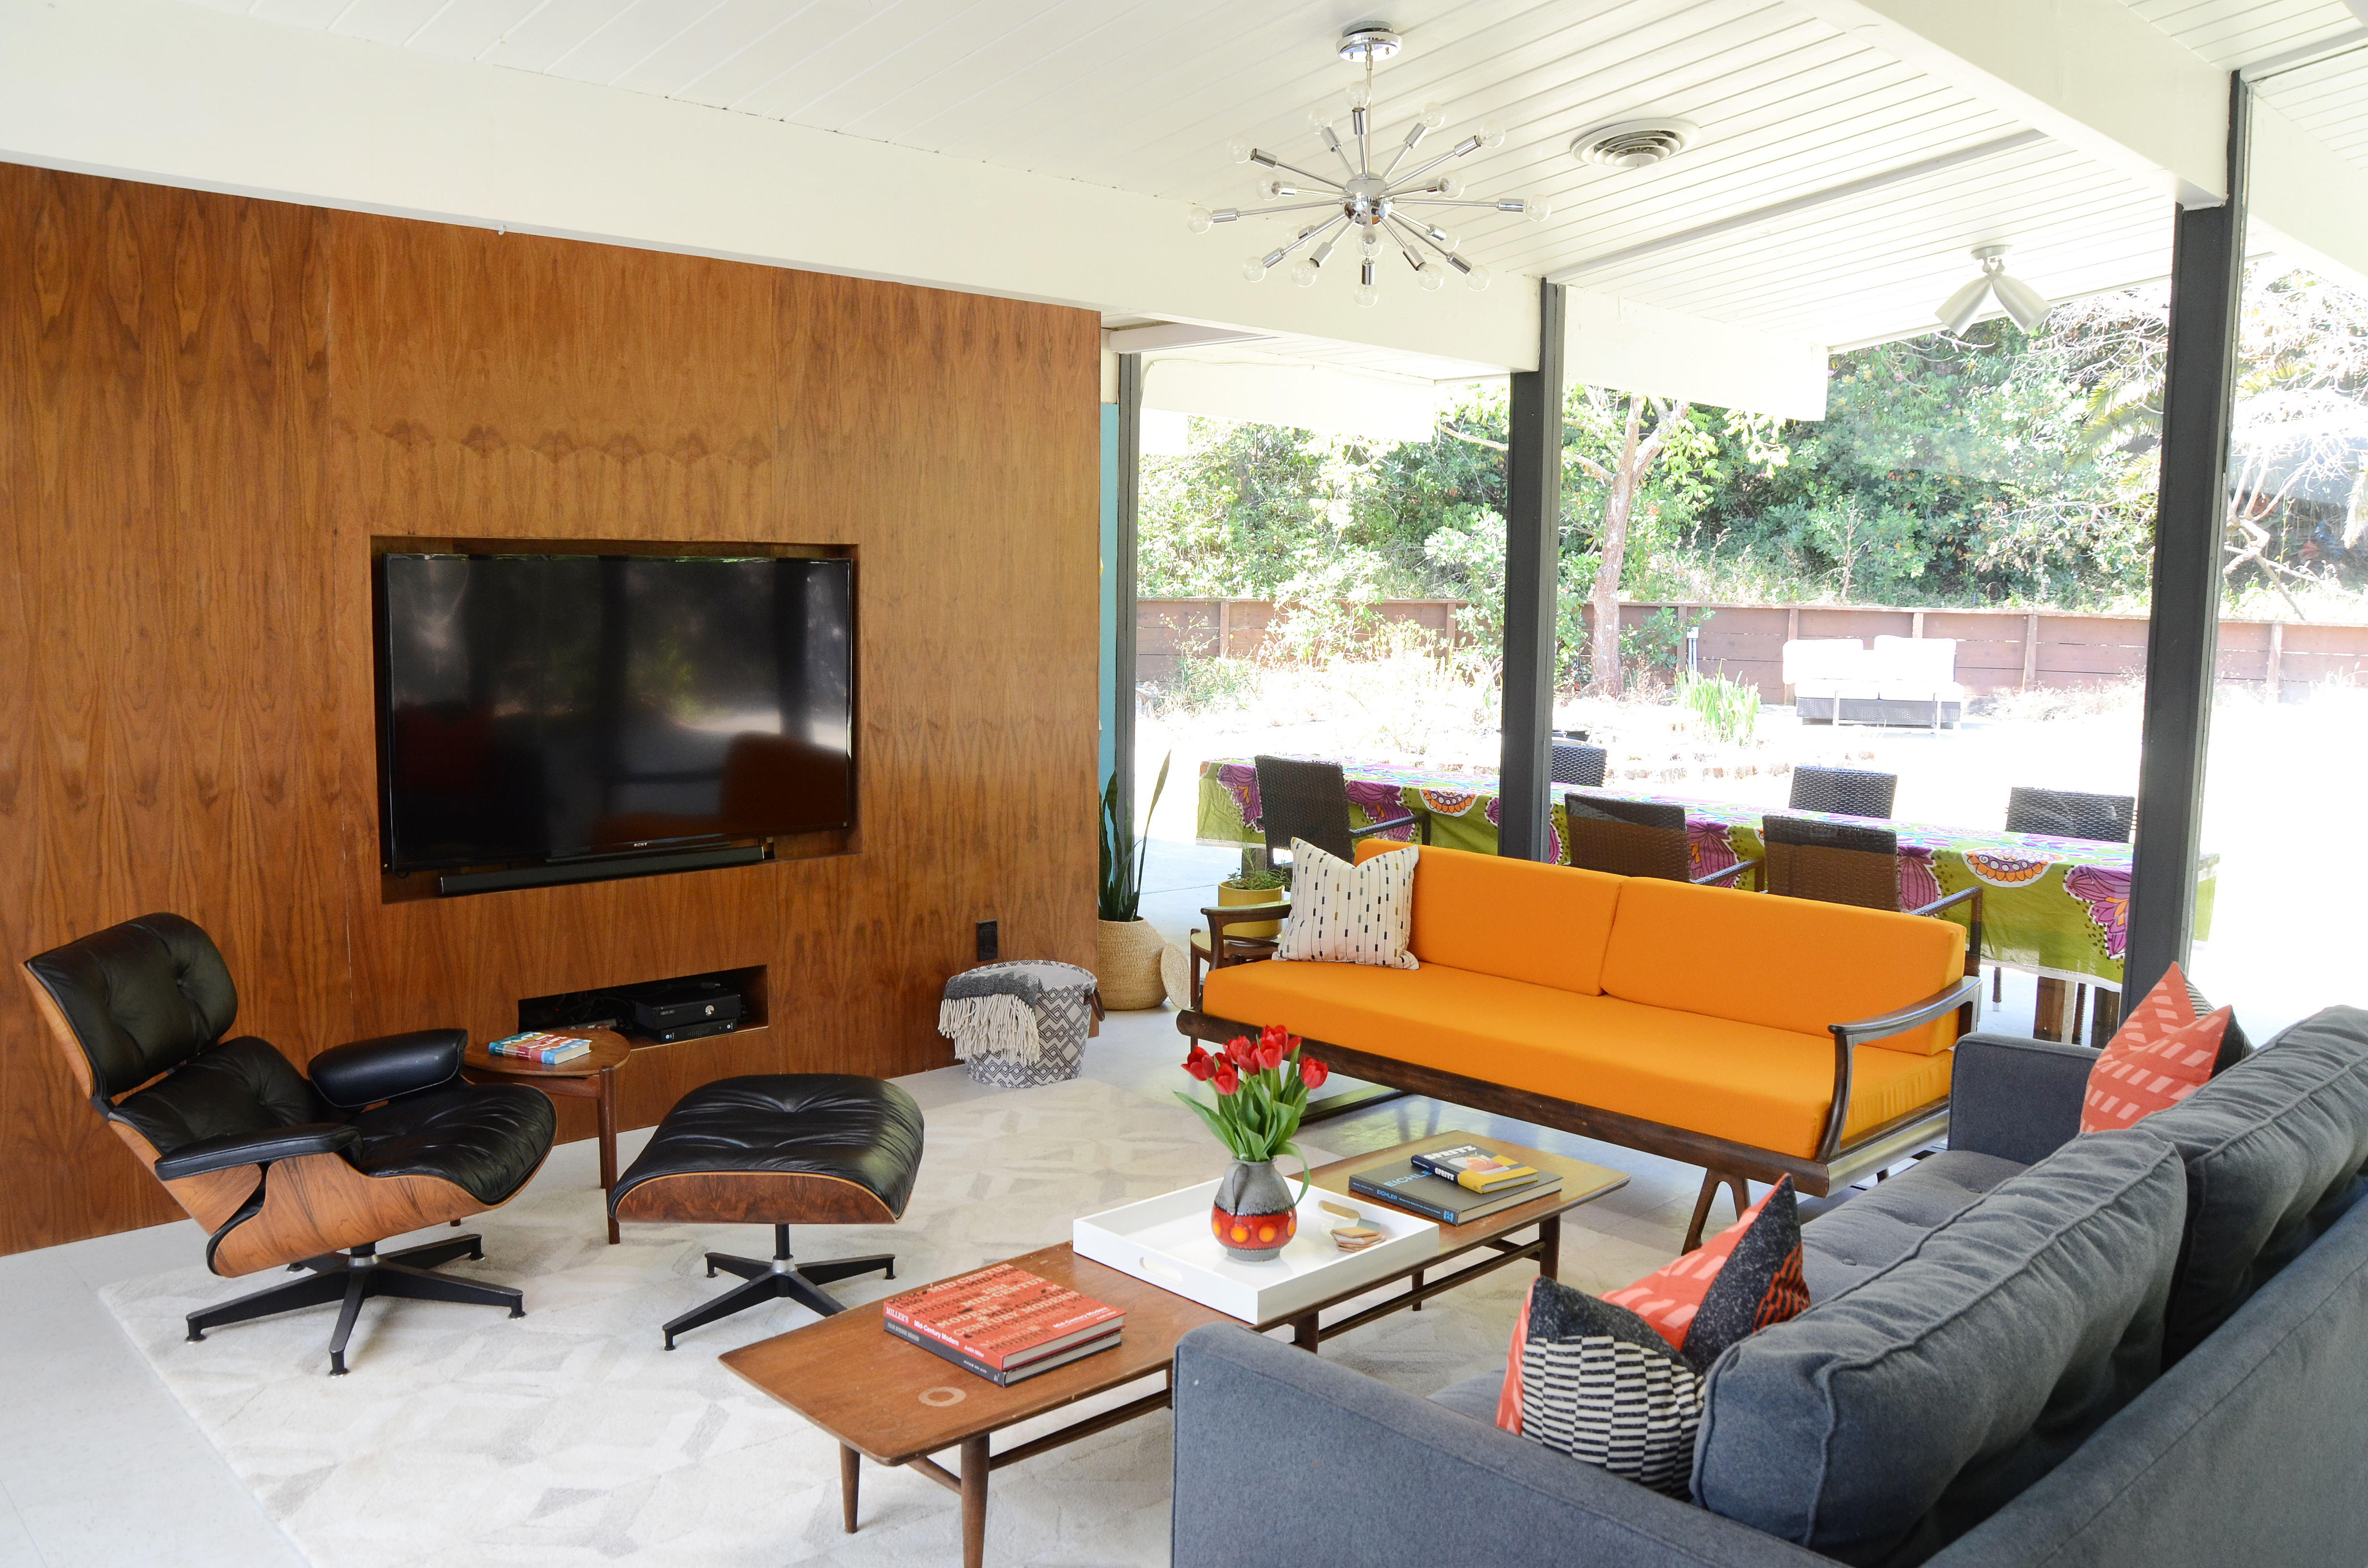 Mid-century modern living room ideas that feel right for now